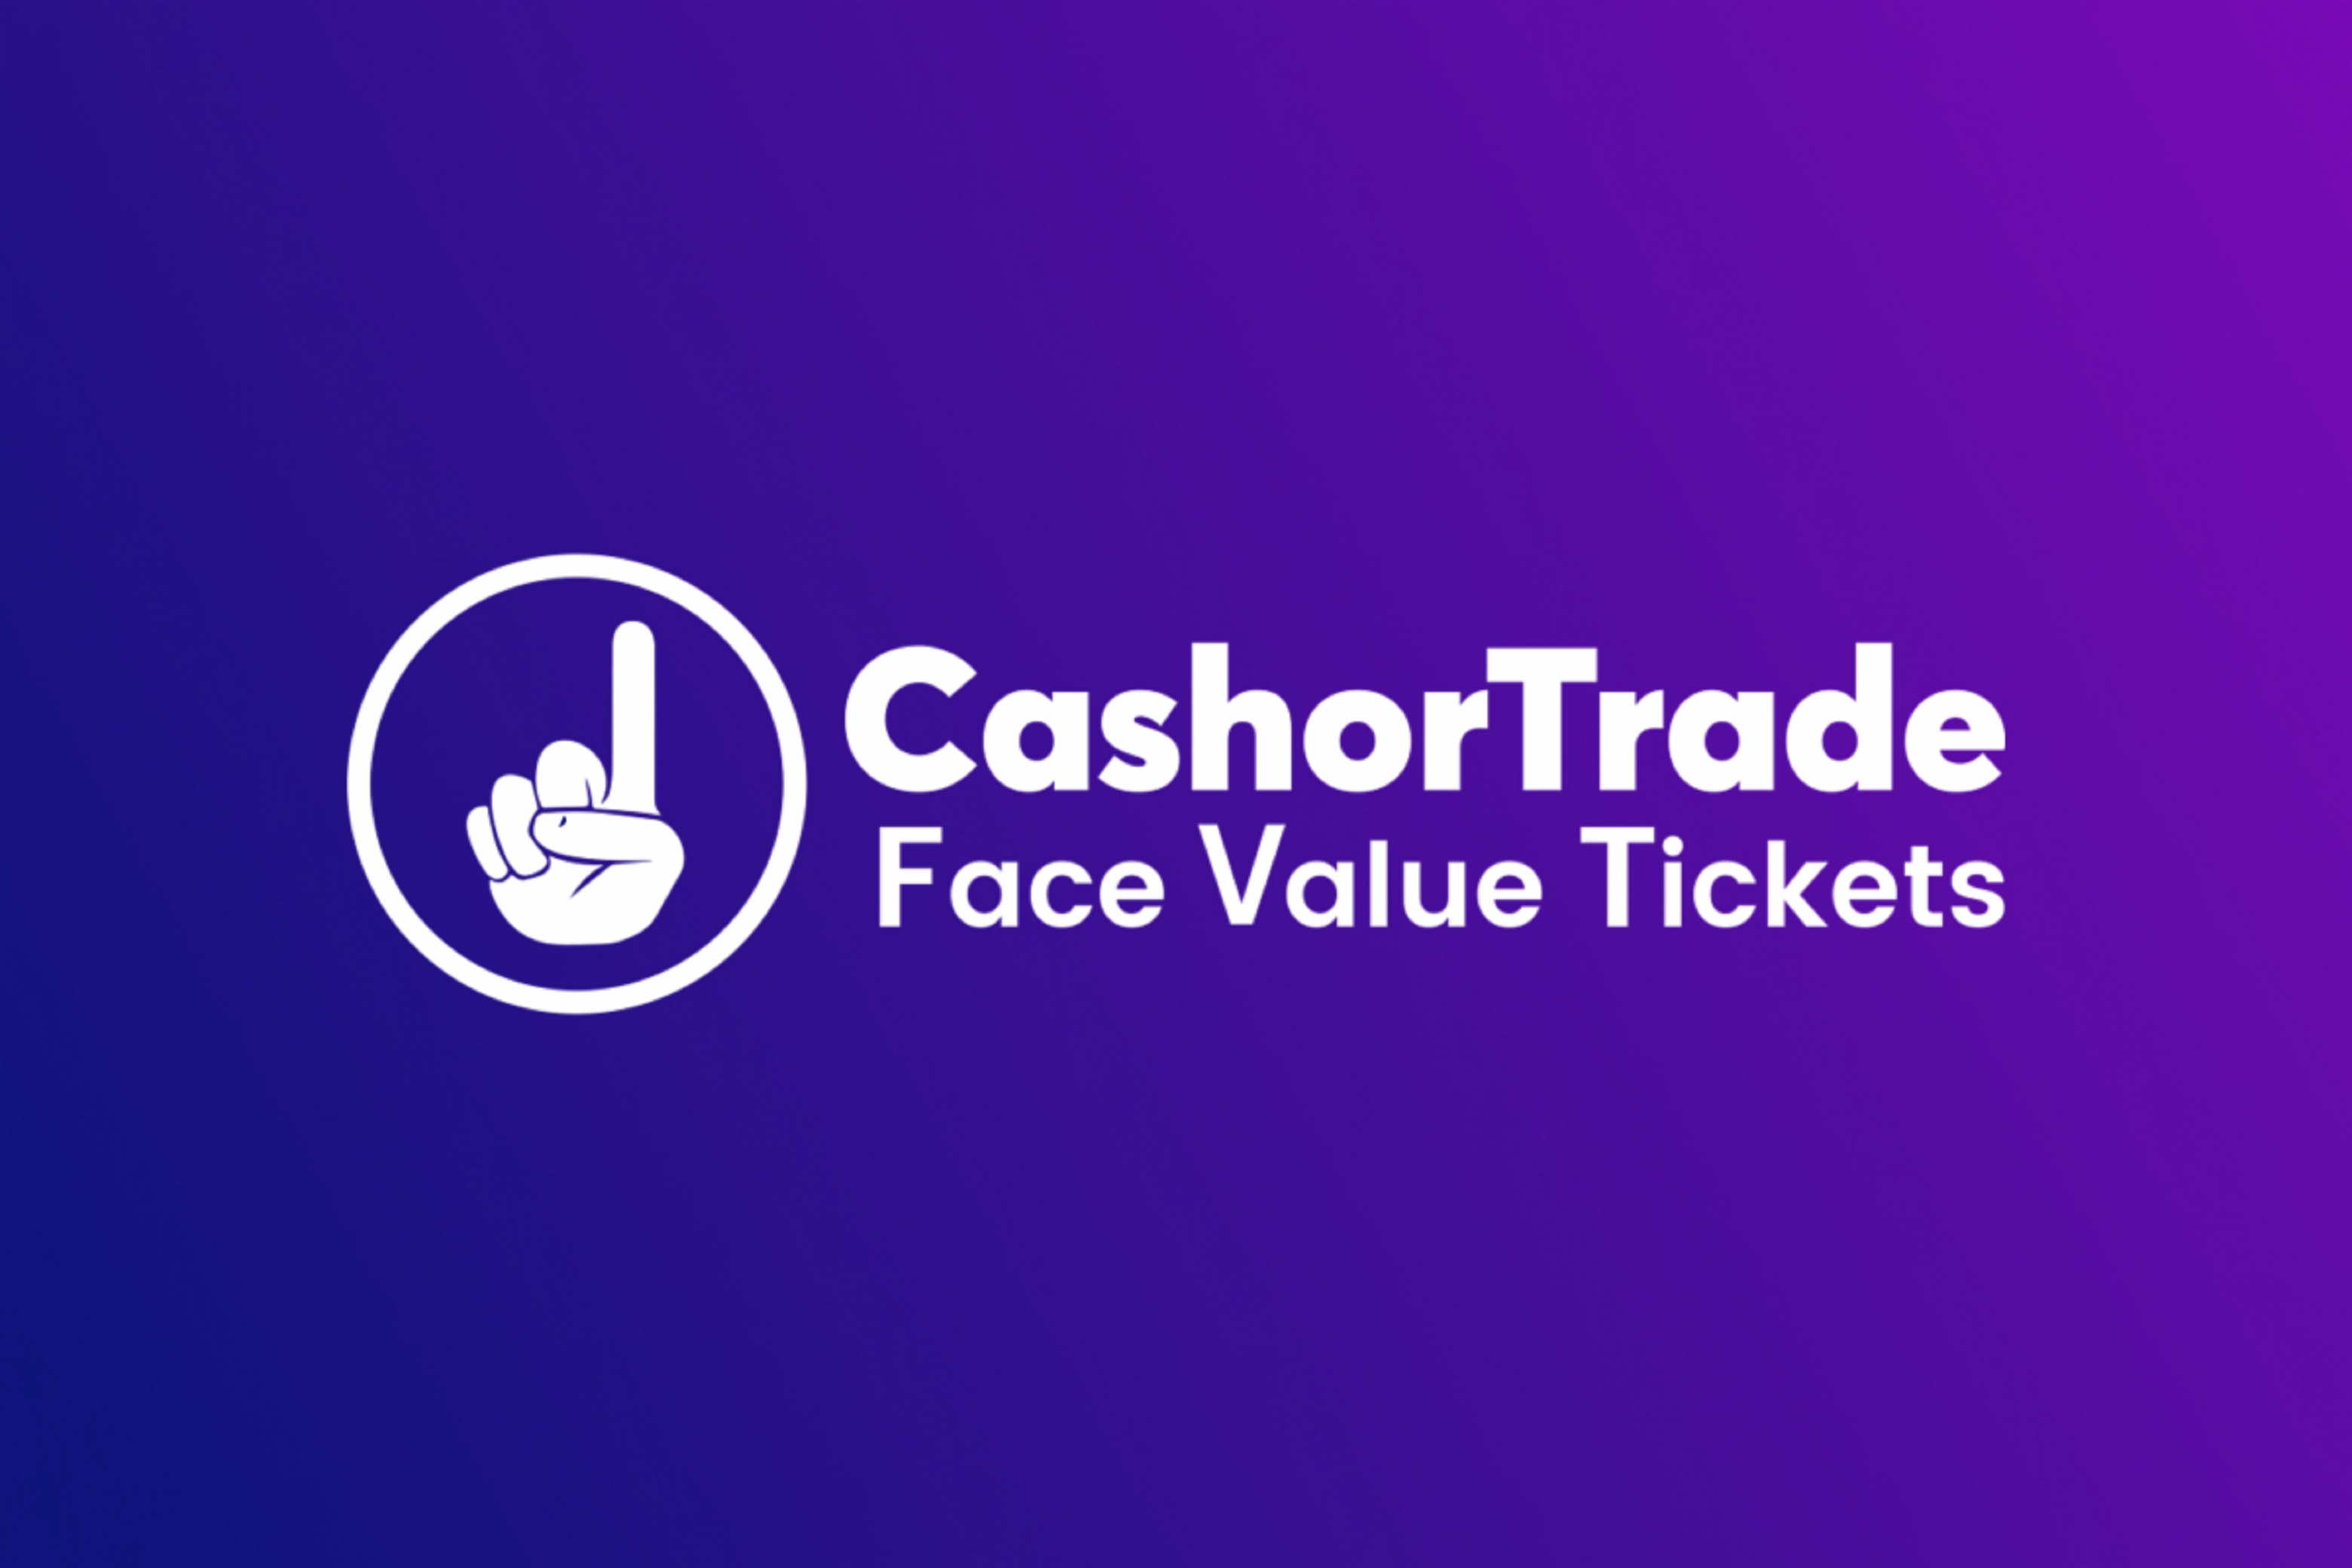 CashorTrade-Leaders of the Face Value Ticket Movement-Join Forces With Artists and Events While Steering Ticket Legislation to Protect Fans